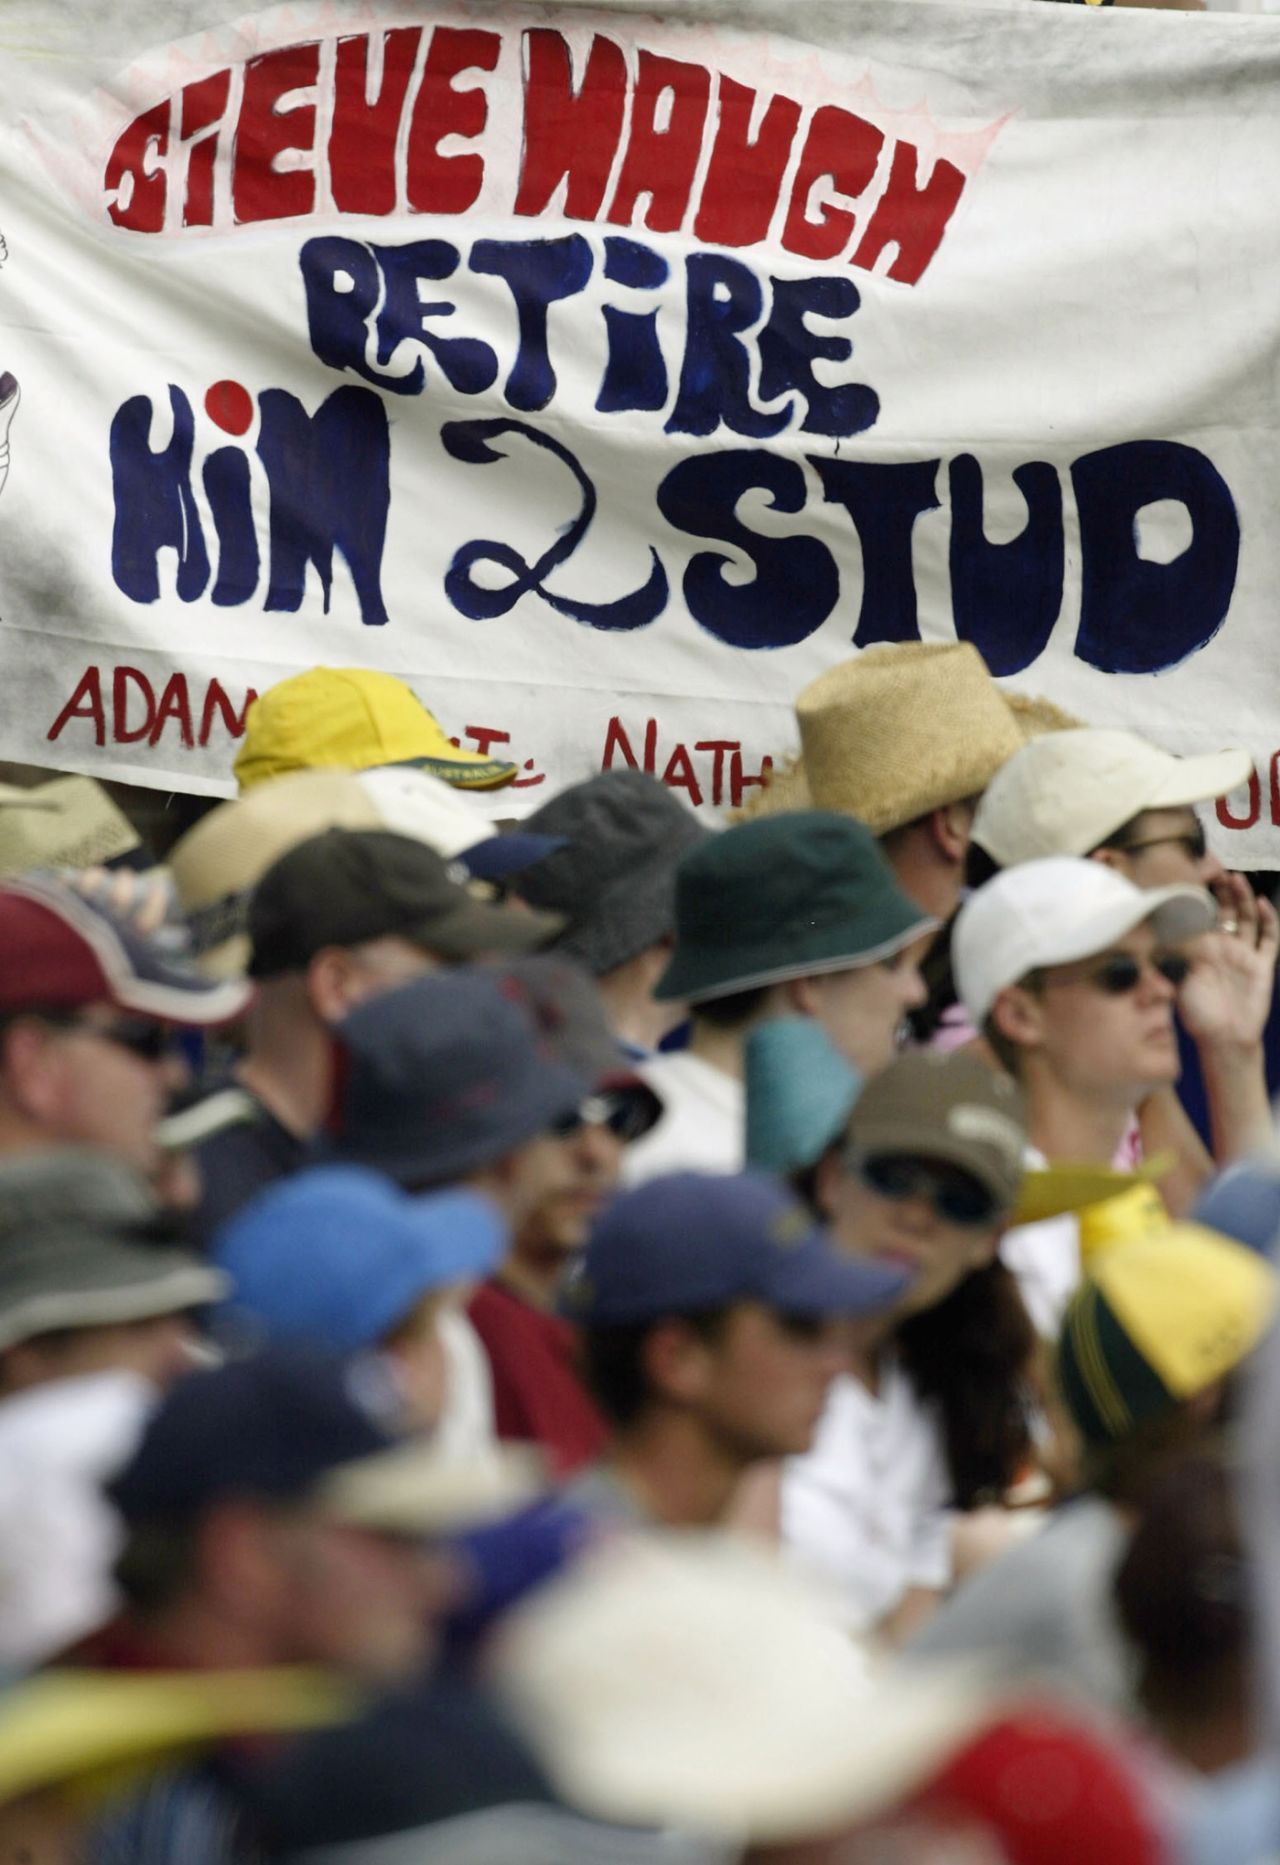 A spectator holds up a sign in support of Steve Waugh, Australia v India, 4th Test, Sydney, 4th day, January 5, 2004